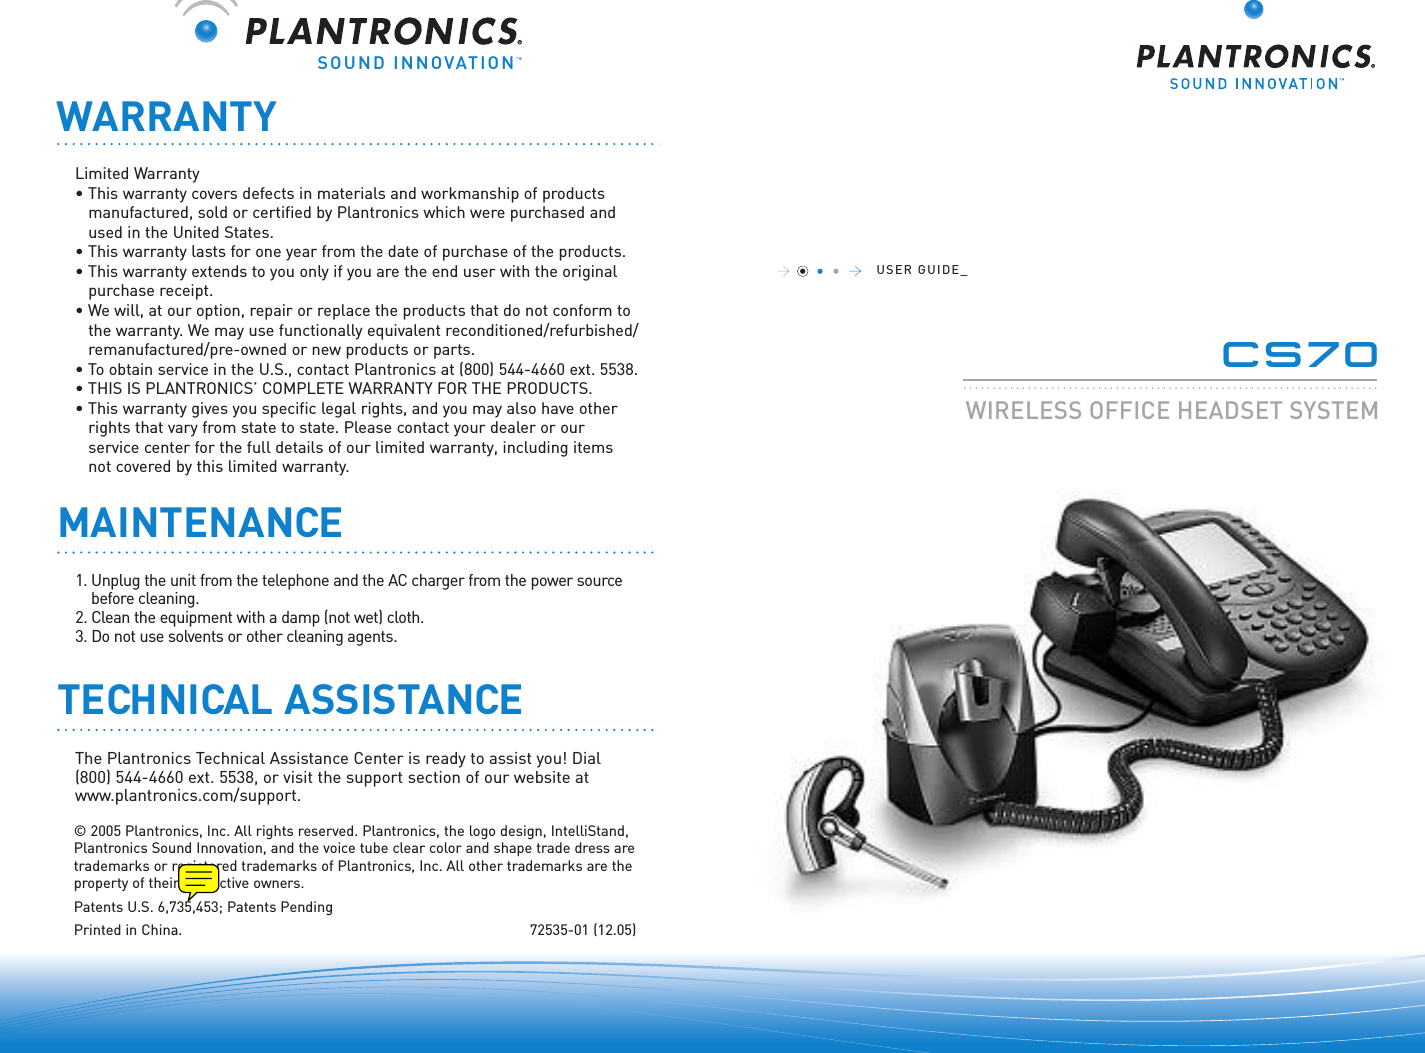 SOUND INNOVATION©2005 Plantronics, Inc. All rights reserved. Plantronics, the logo design, IntelliStand,Plantronics Sound Innovation, and the voice tube clear color and shape trade dress aretrademarks or registered trademarks of Plantronics, Inc. All other trademarks are theproperty of their respective owners.Patents U.S. 6,735,453; Patents PendingPrinted in China.  72535-01 (12.05)WARRANTYUSER GUIDE_CS70.......................................................................WIRELESS OFFICE HEADSETSYSTEMLimited Warranty• This warranty covers defects in materials and workmanship of products manufactured, sold or certified by Plantronics which were purchased and used in the United States.• This warranty lasts for one year from the date of purchase of the products.• This warranty extends to you only if you are the end user with the originalpurchase receipt.• We will, at our option, repair or replace the products that do not conform tothe warranty. We may use functionally equivalent reconditioned/refurbished/remanufactured/pre-owned or new products or parts.•To obtain service in the U.S., contact Plantronics at (800) 544-4660 ext. 5538.• THIS IS PLANTRONICS’ COMPLETE WARRANTY FOR THE PRODUCTS.• This warranty gives you specific legal rights, and you may also have other rights that vary from state to state. Please contact your dealer or our service center for the full details of our limited warranty, including items not covered by this limited warranty.The Plantronics Technical Assistance Center is ready to assist you! Dial (800) 544-4660 ext. 5538, or visit the support section of our website atwww.plantronics.com/support.TECHNICAL ASSISTANCEMAINTENANCE1. Unplug the unit from the telephone and the AC charger from the power sourcebefore cleaning.2. Clean the equipment with a damp (not wet) cloth. 3. Do not use solvents or other cleaning agents.  